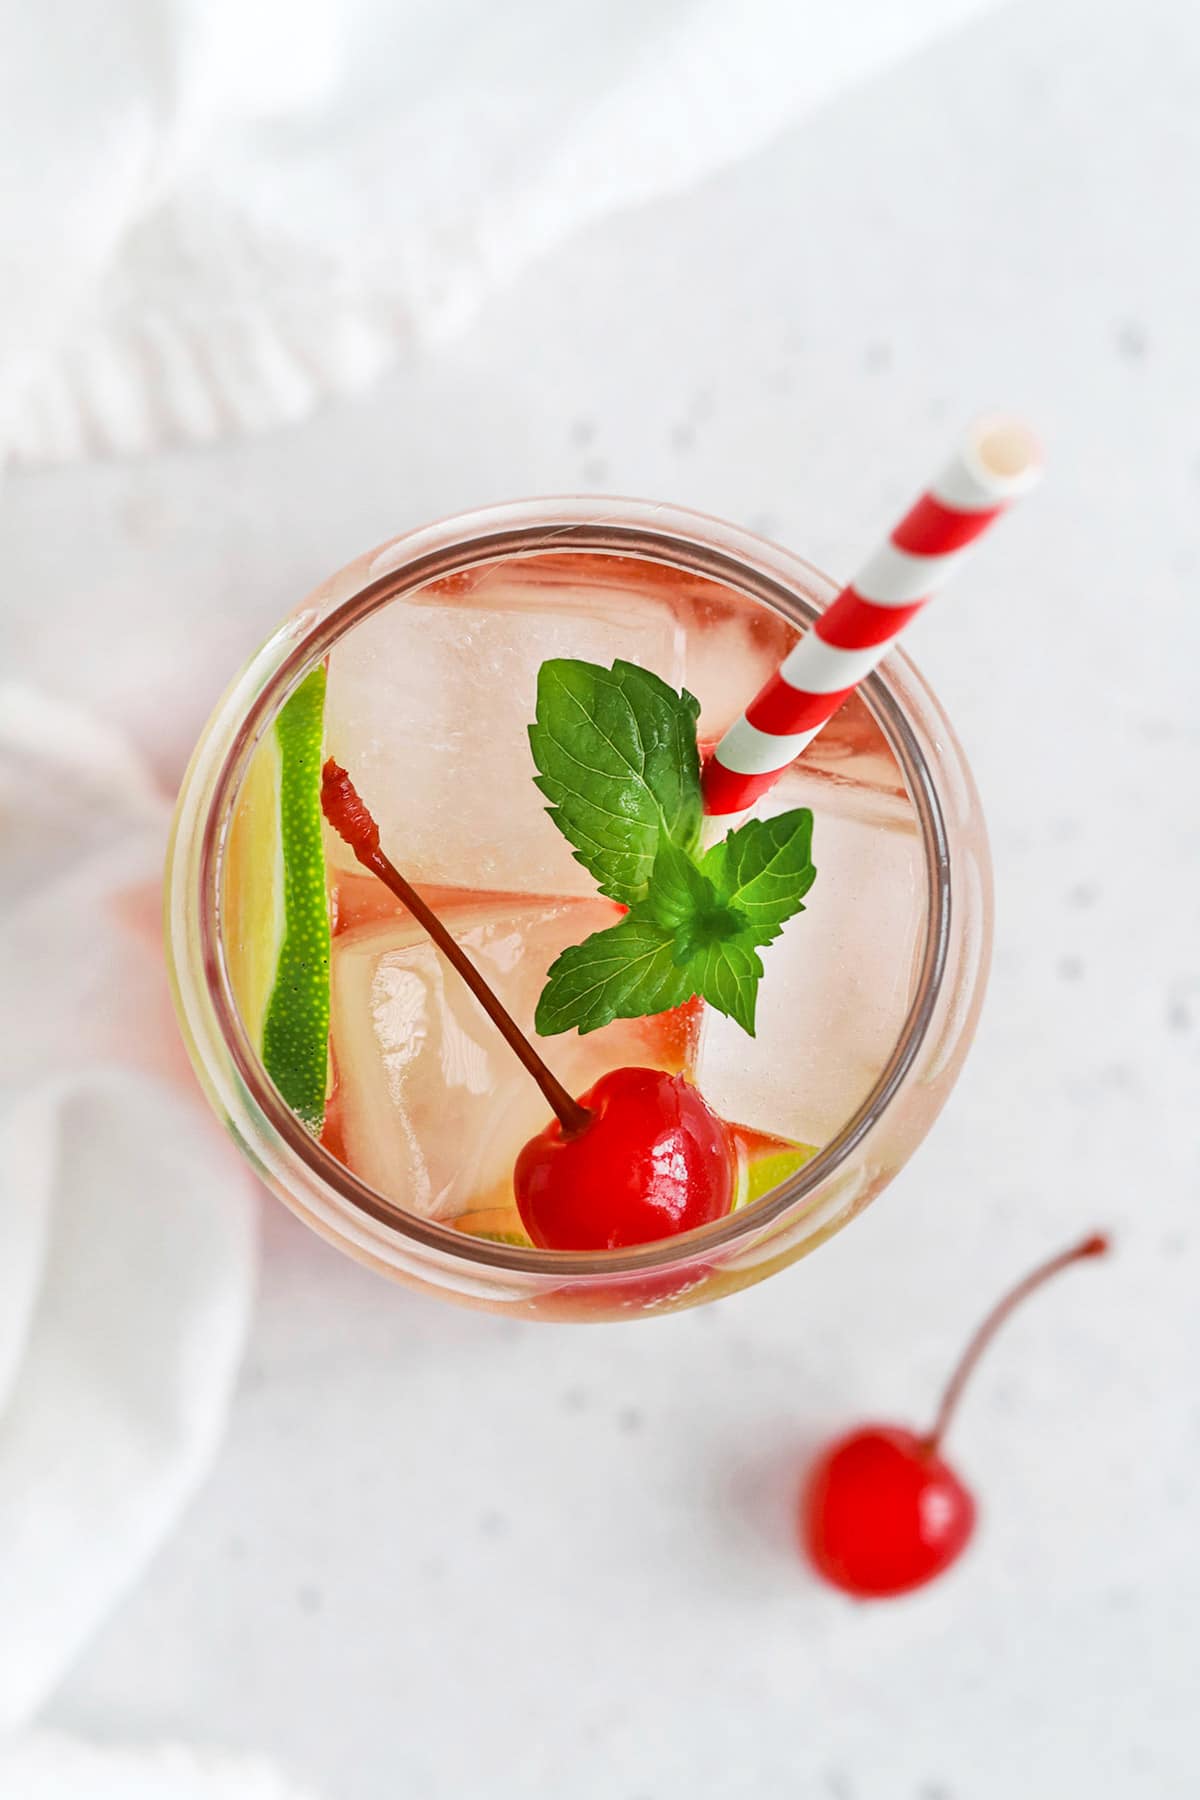 Overhead view of a classic shirley temple drink garnished with lime, cherry, and fresh mint